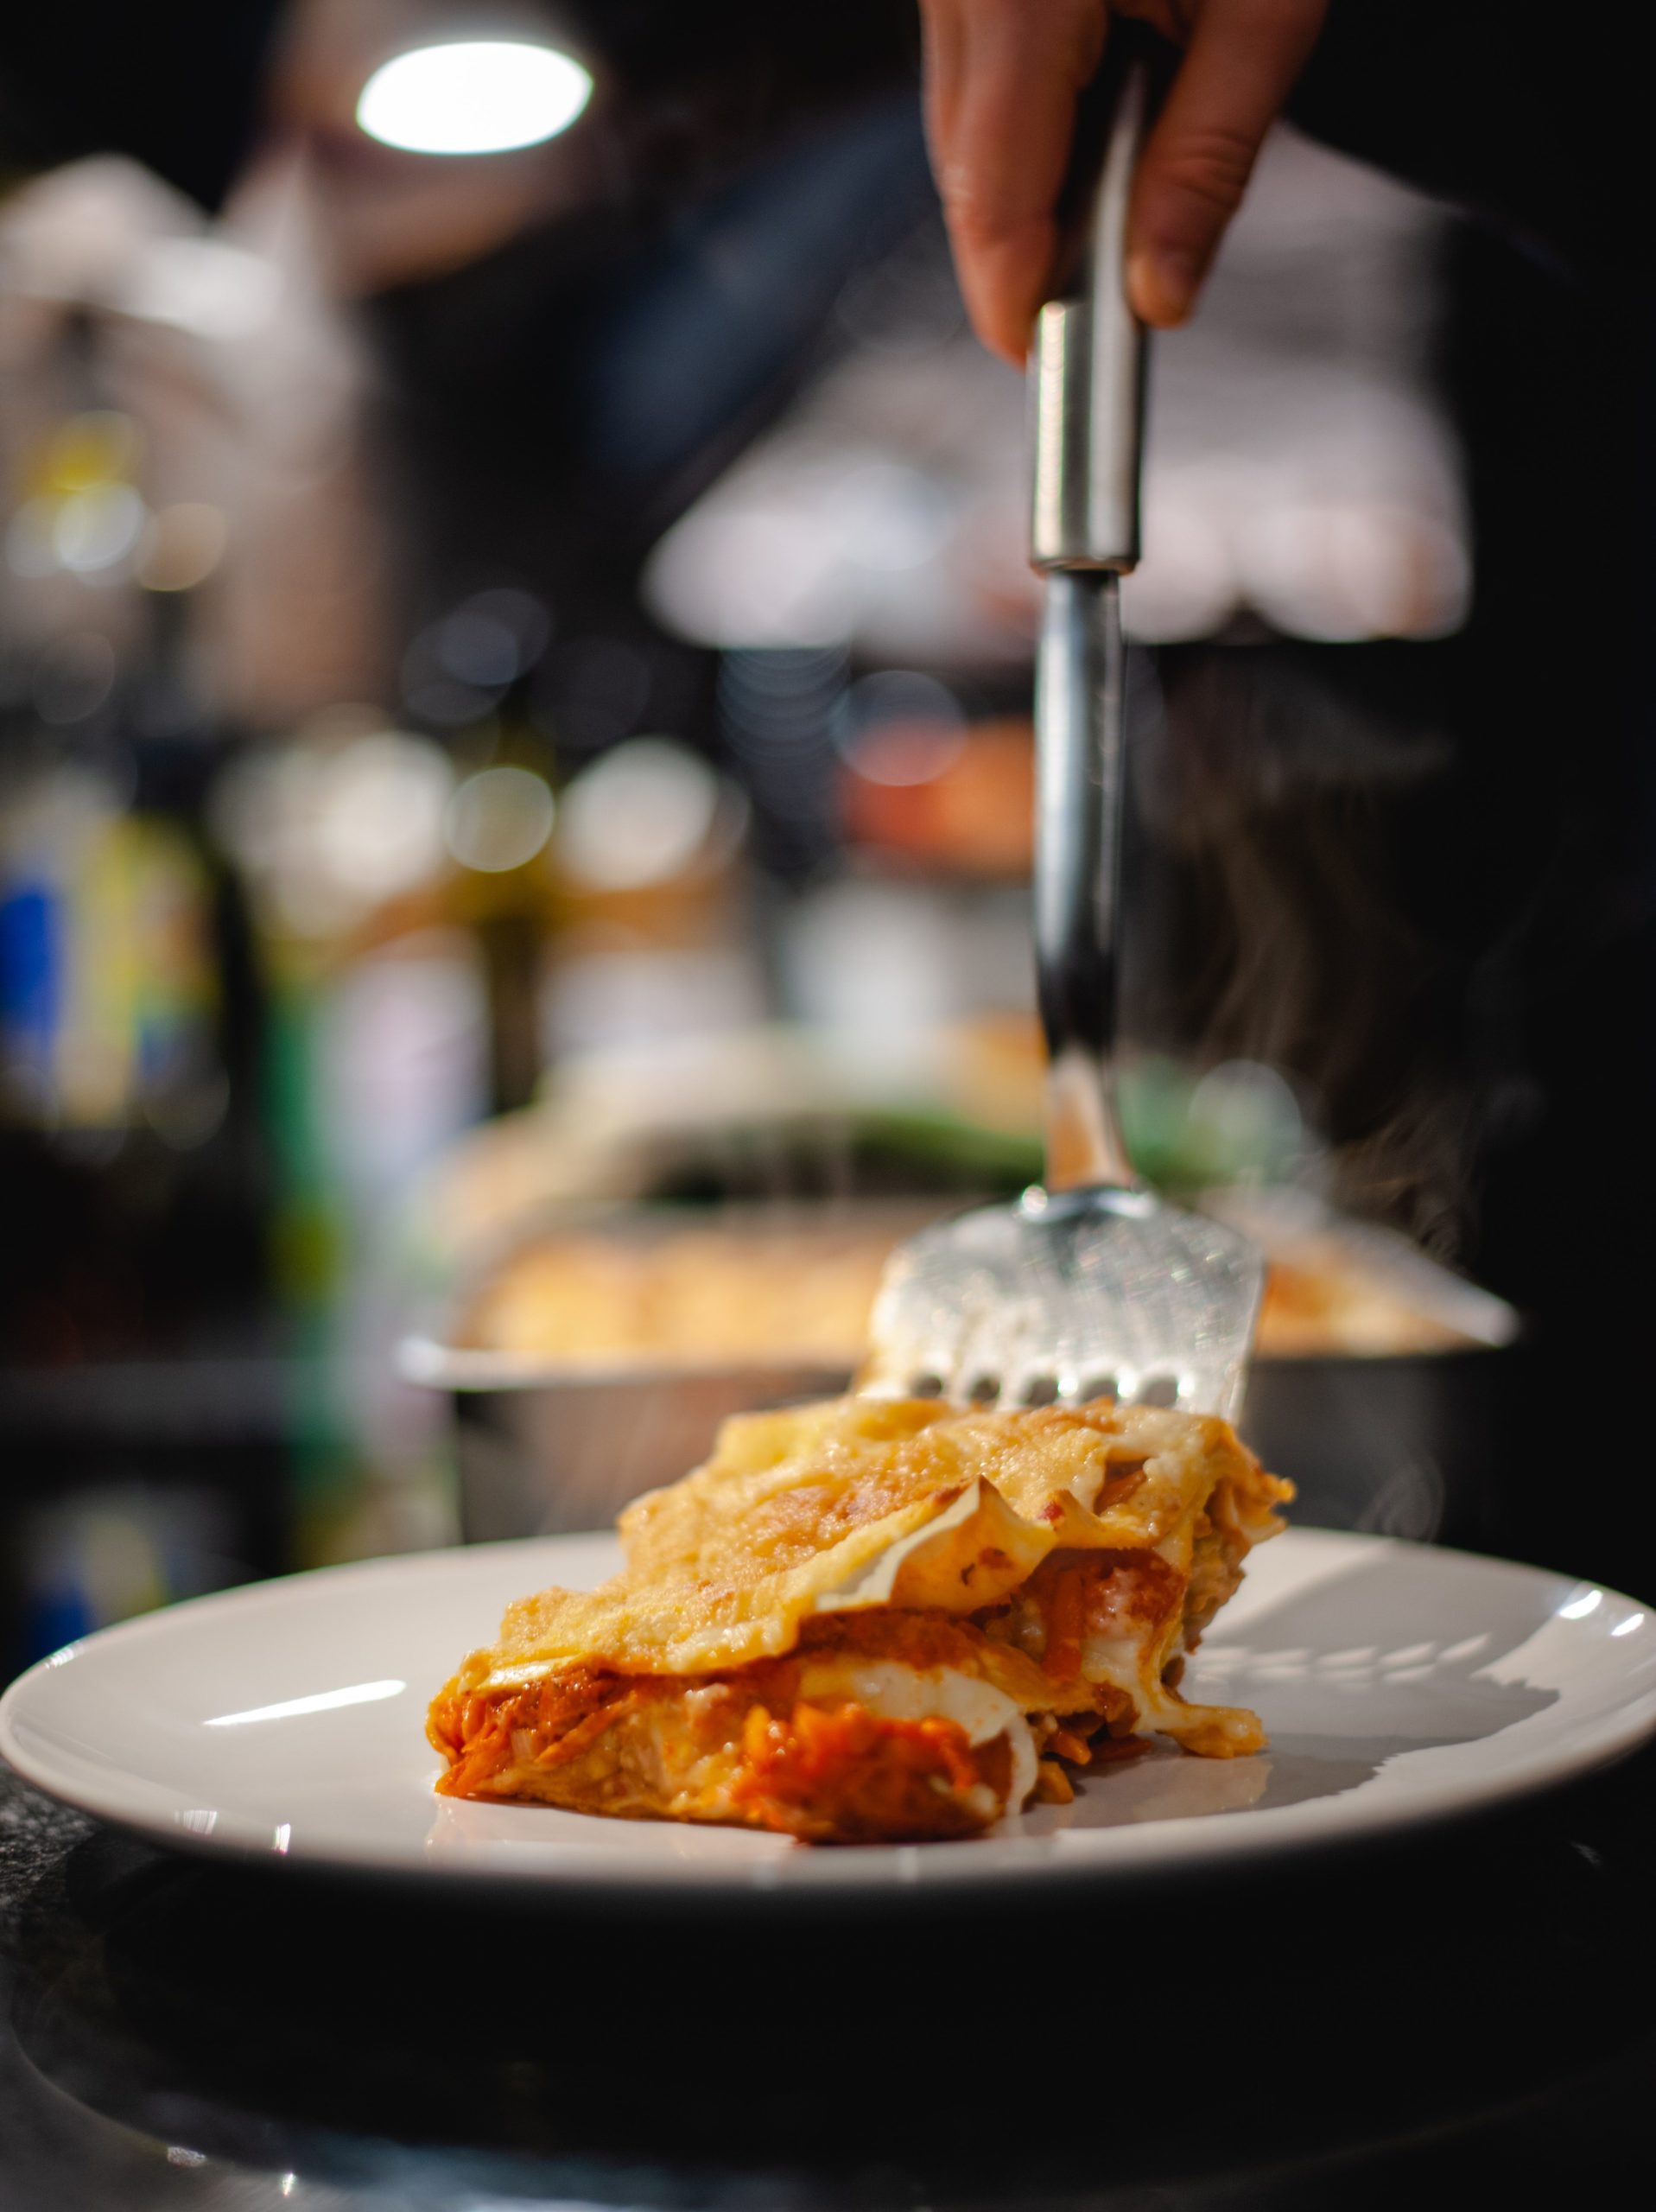 Piping hot pumpkin lasagna being served onto a plate with a silver spatula